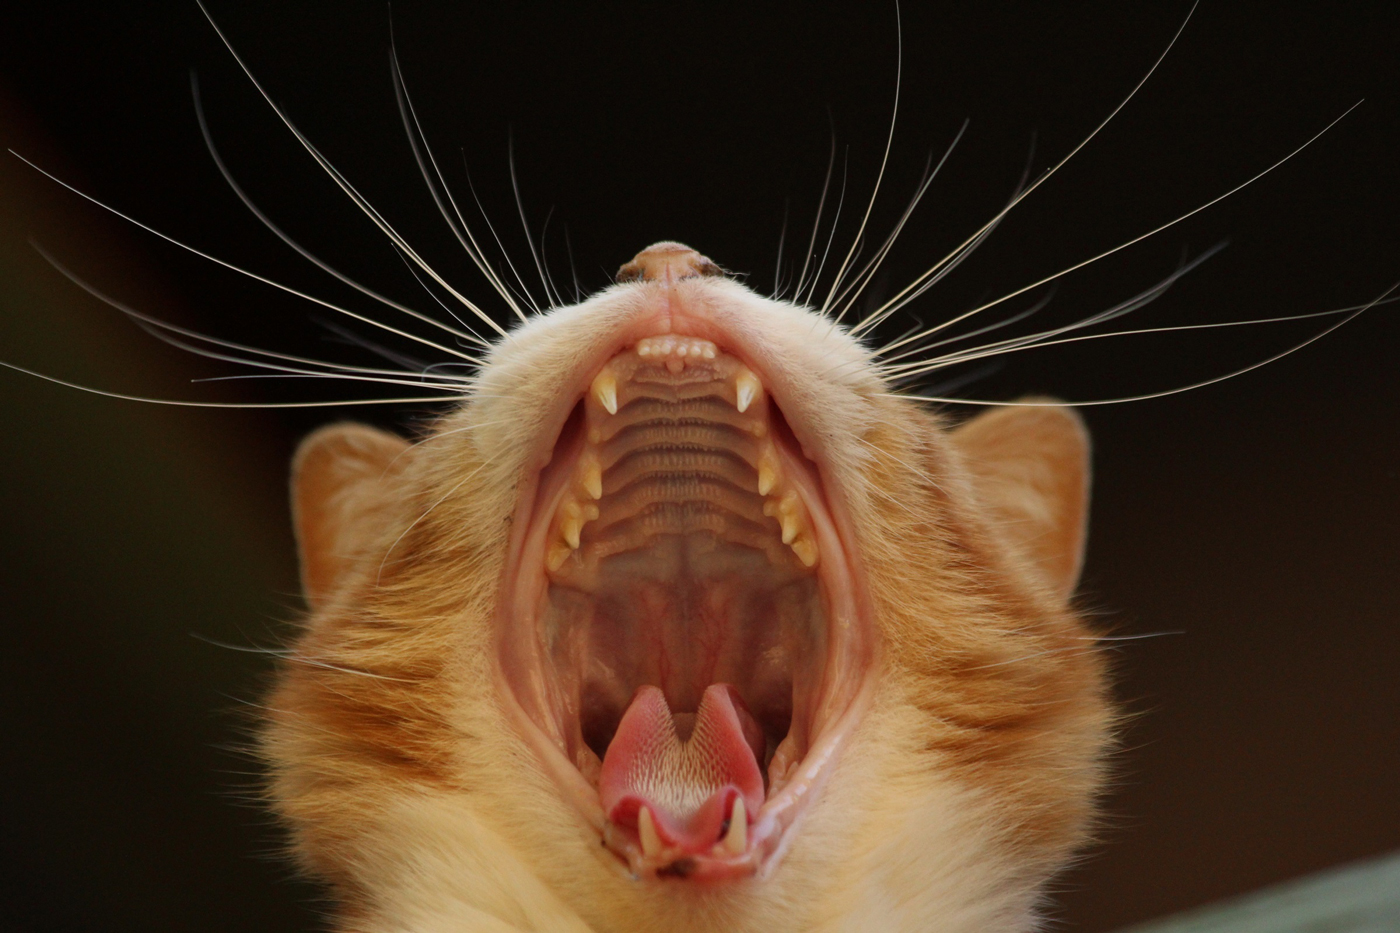 A cat with its mouth wide open while it's yawning